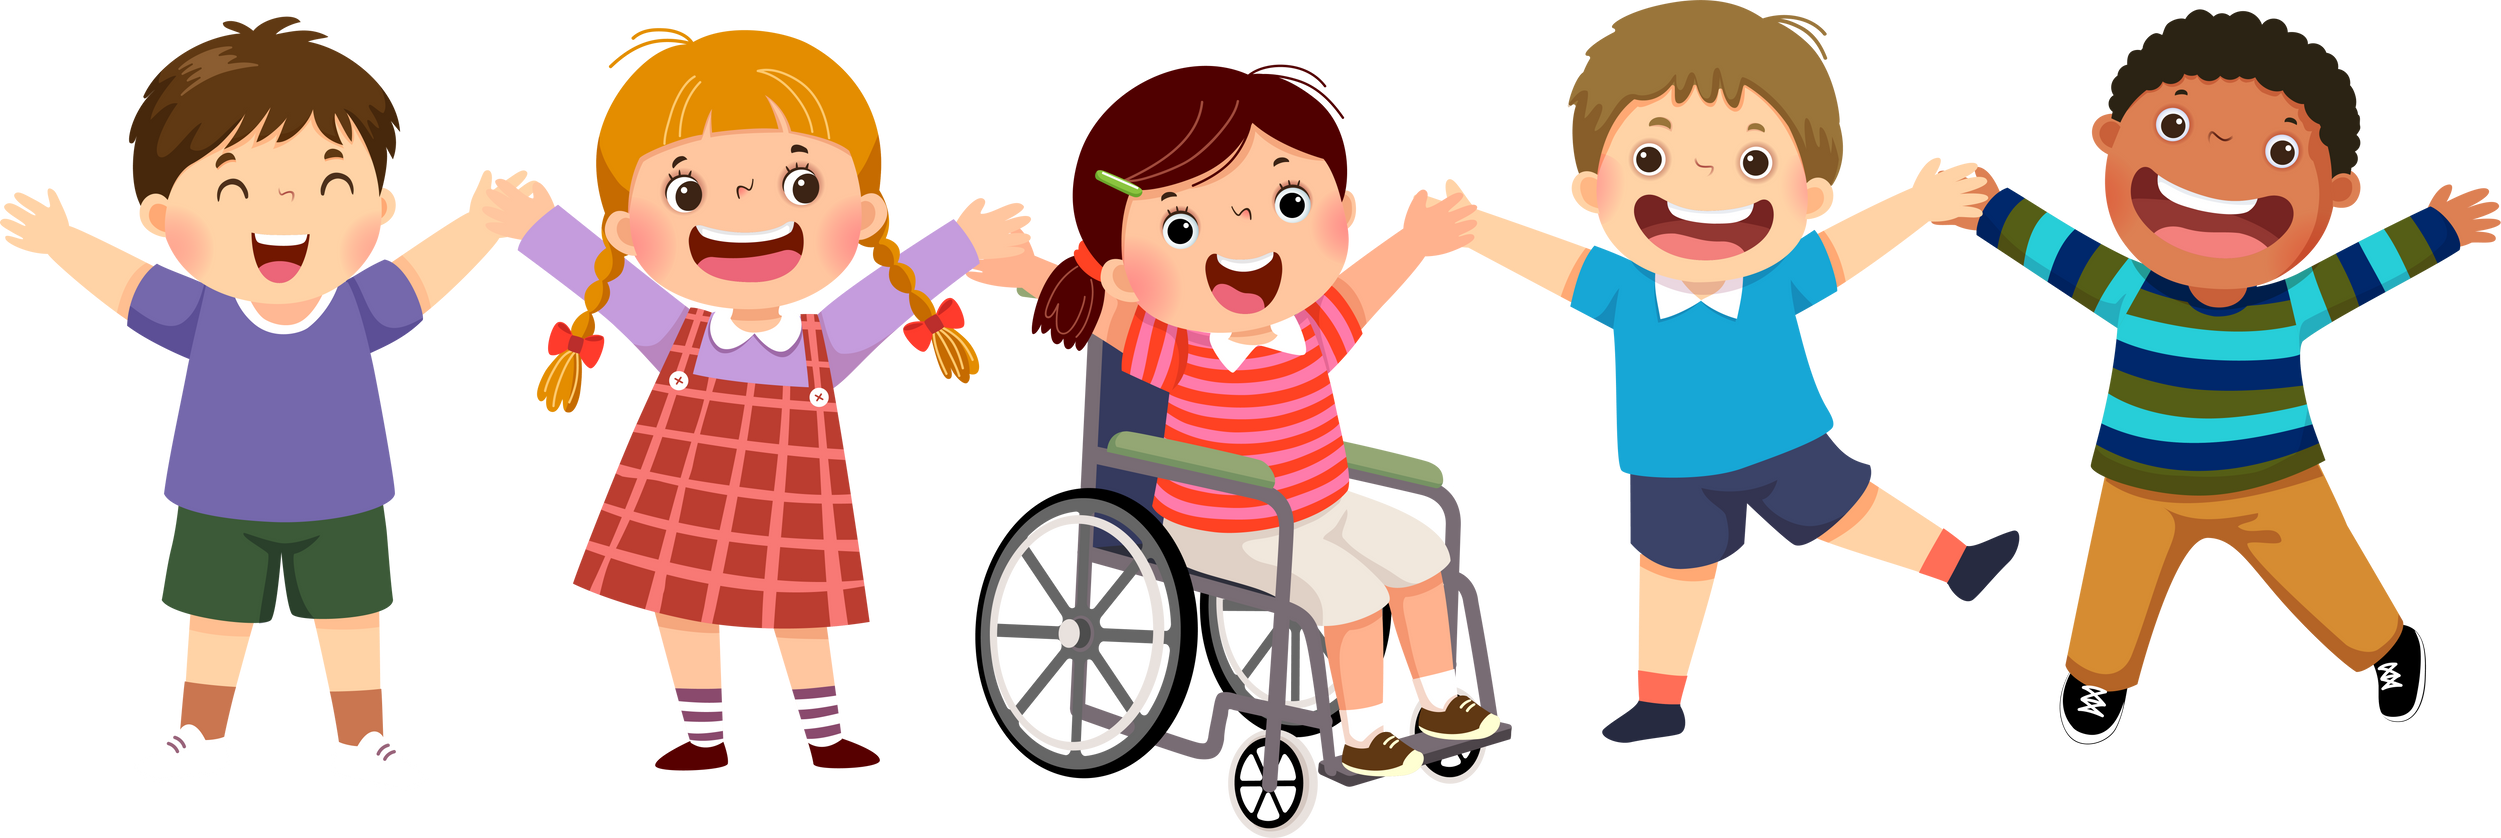 Happy disabled girl in a wheelchair and her friends jumping together